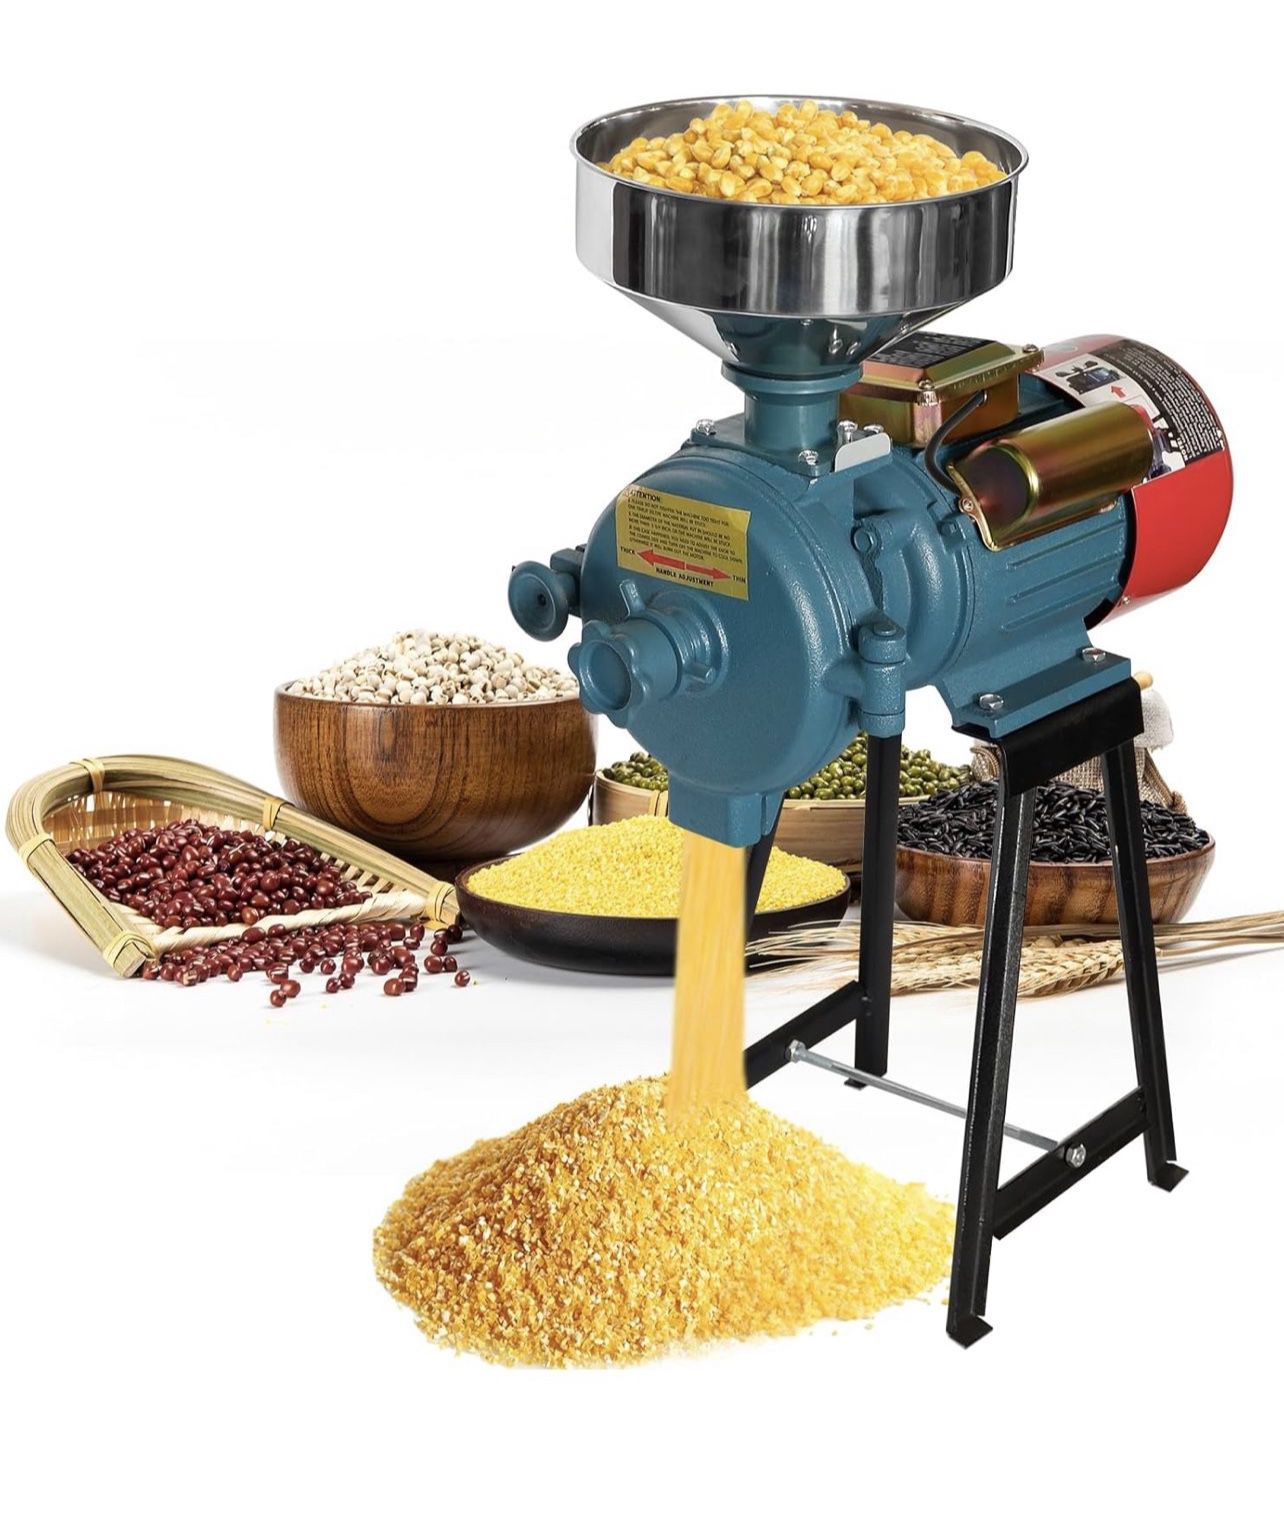 Grain Mills Electric Grain Grinder Mill, 3000W Corn Mill Grinder, 110V Flour Mill Wheat Grinder Rice Mill Machine, Feed Mill Dry Cereals Grinder With 